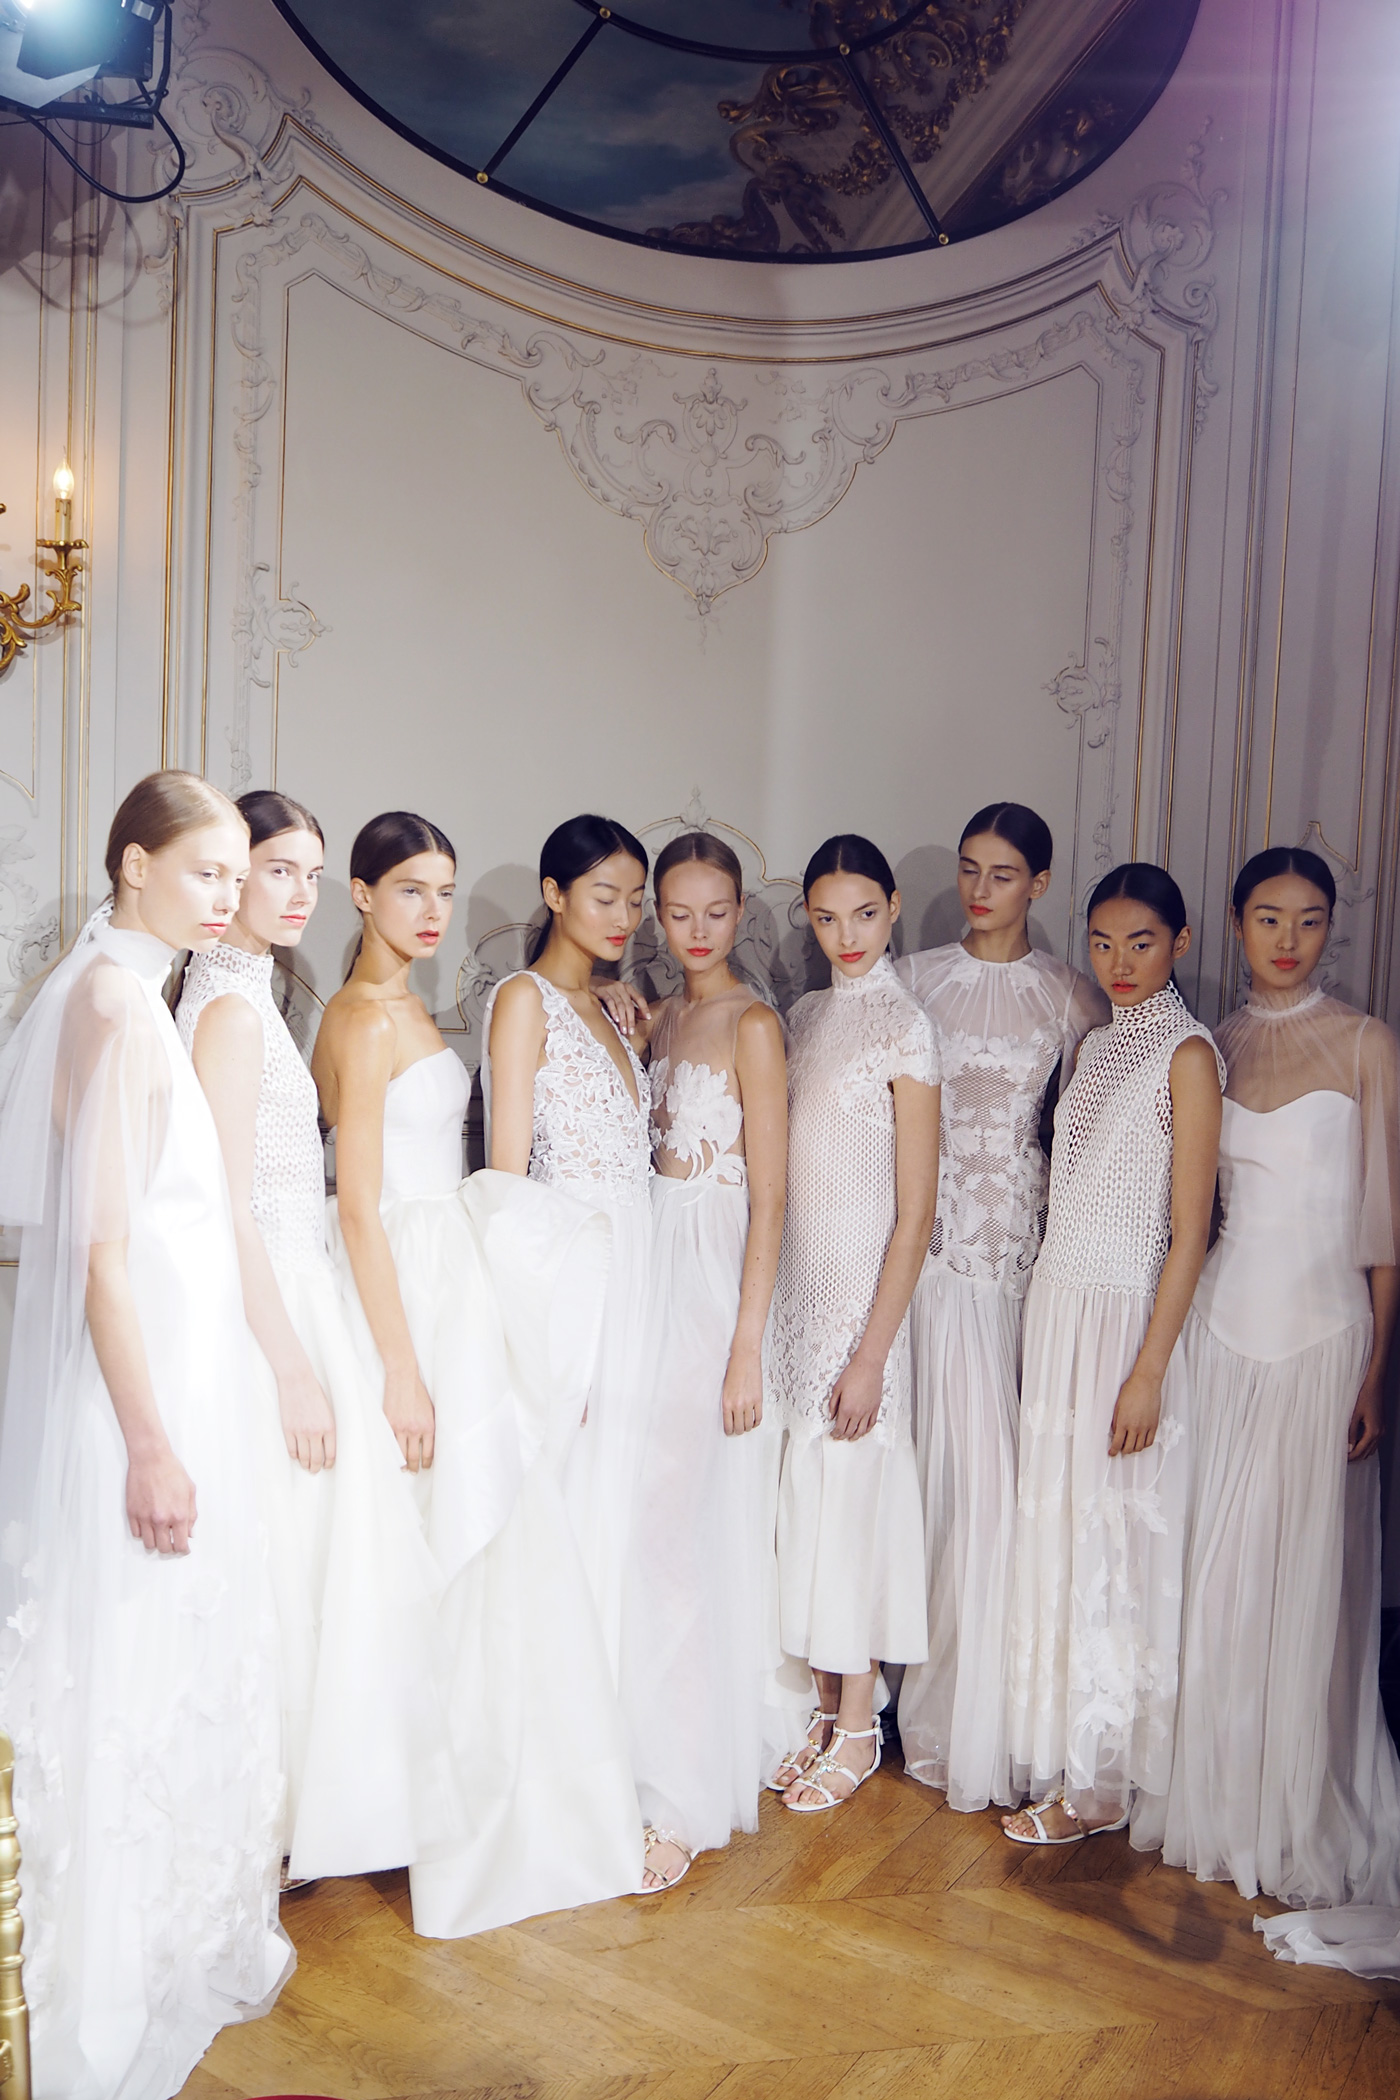 The Kaviar Gauche Show during Paris Fashion Week | Bridal Couture Show | Make up: Catrice Cosmetics